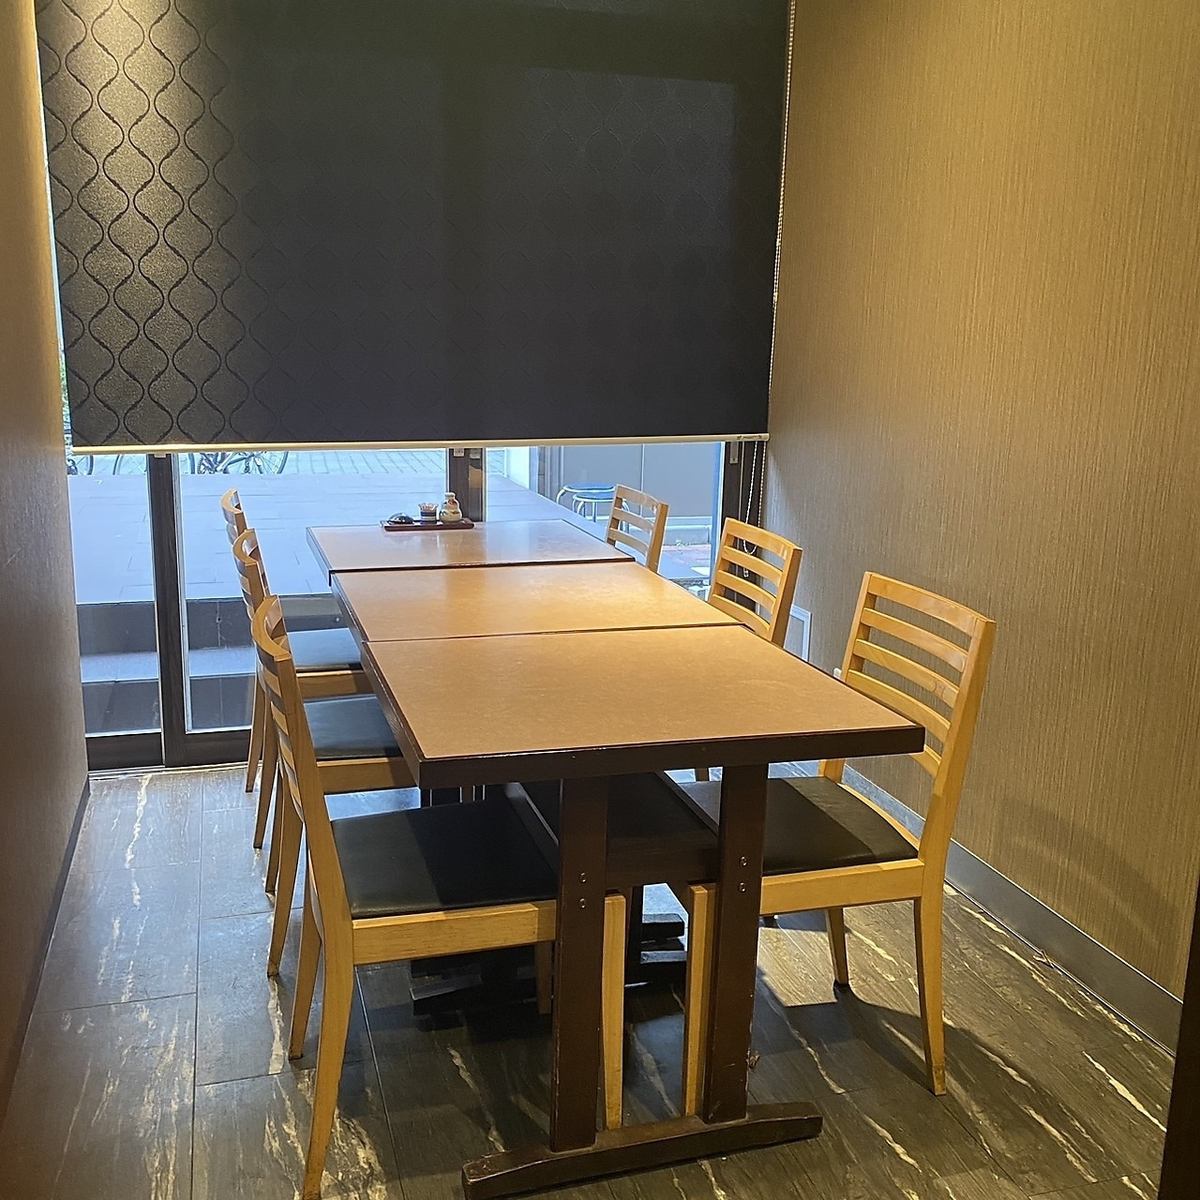 We have two private rooms for 6 people!We will protect your private space.